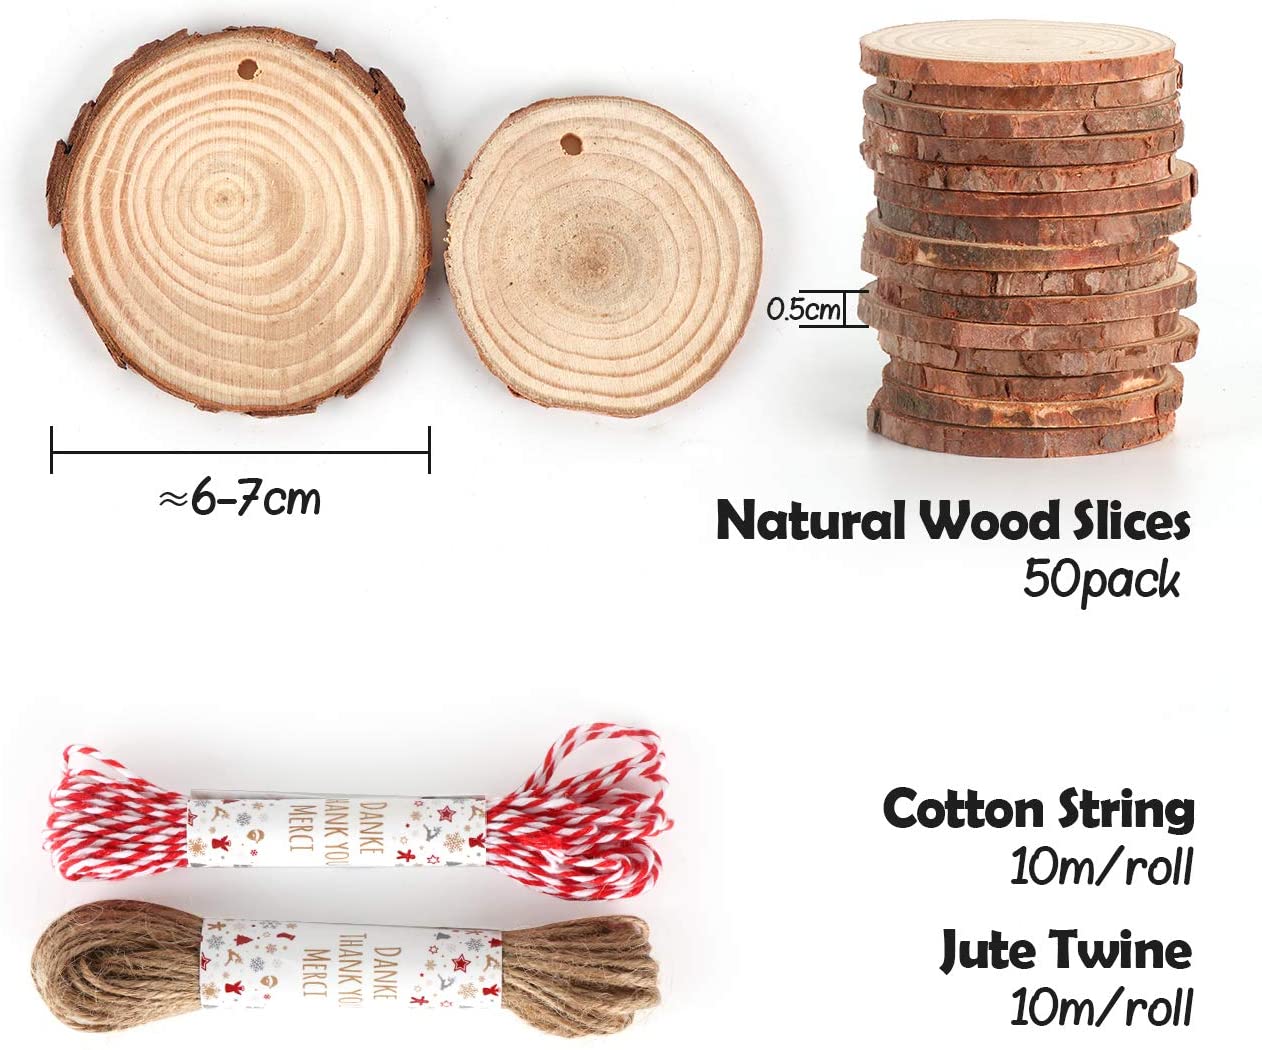 6-7cm 2.4-2.8 Wood Discs with Jute Twine for DIY Crafts Wedding Decorations Christmas Ornaments 30pcs Natural Wood Circles with Hole iBayx Wood Slices 